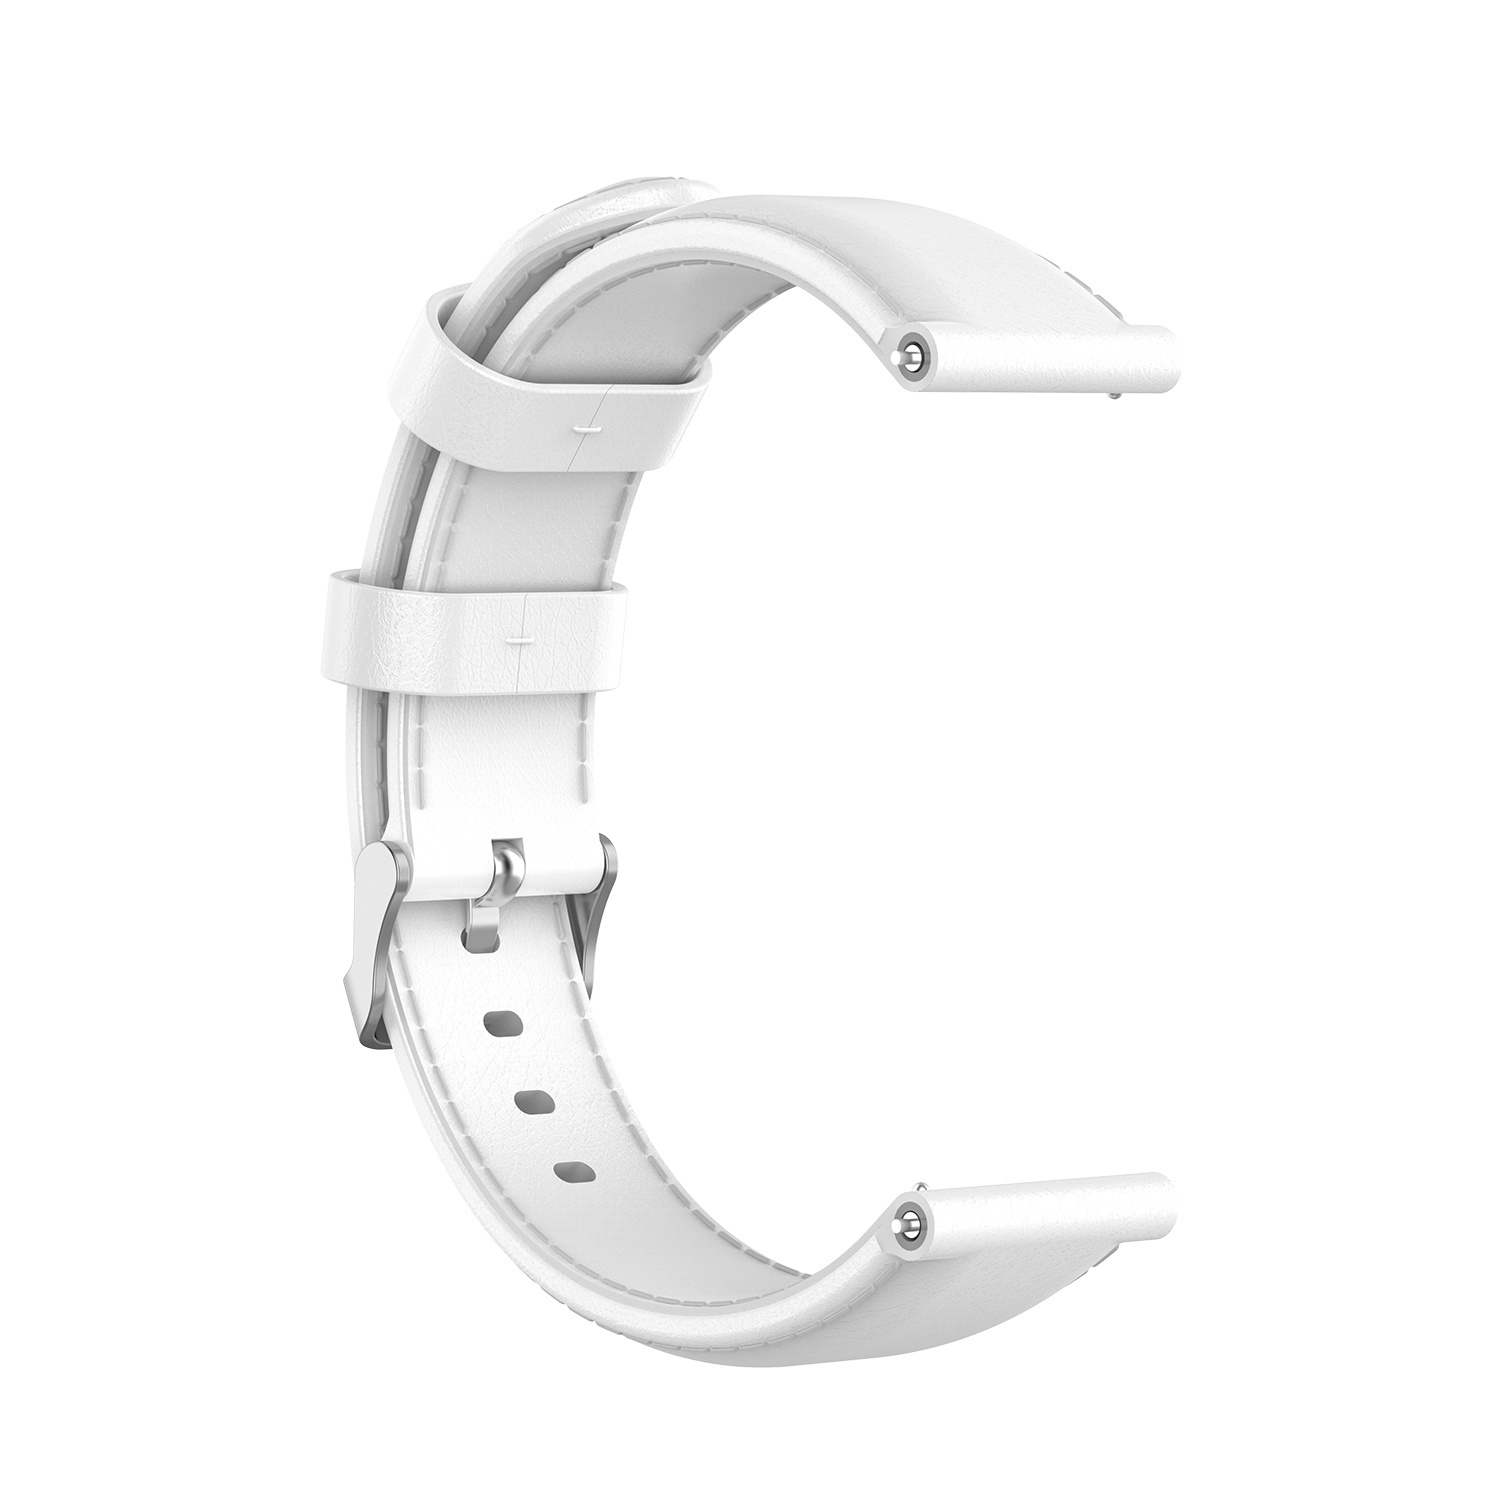 Huawei Watch Gt Leather Strap - White